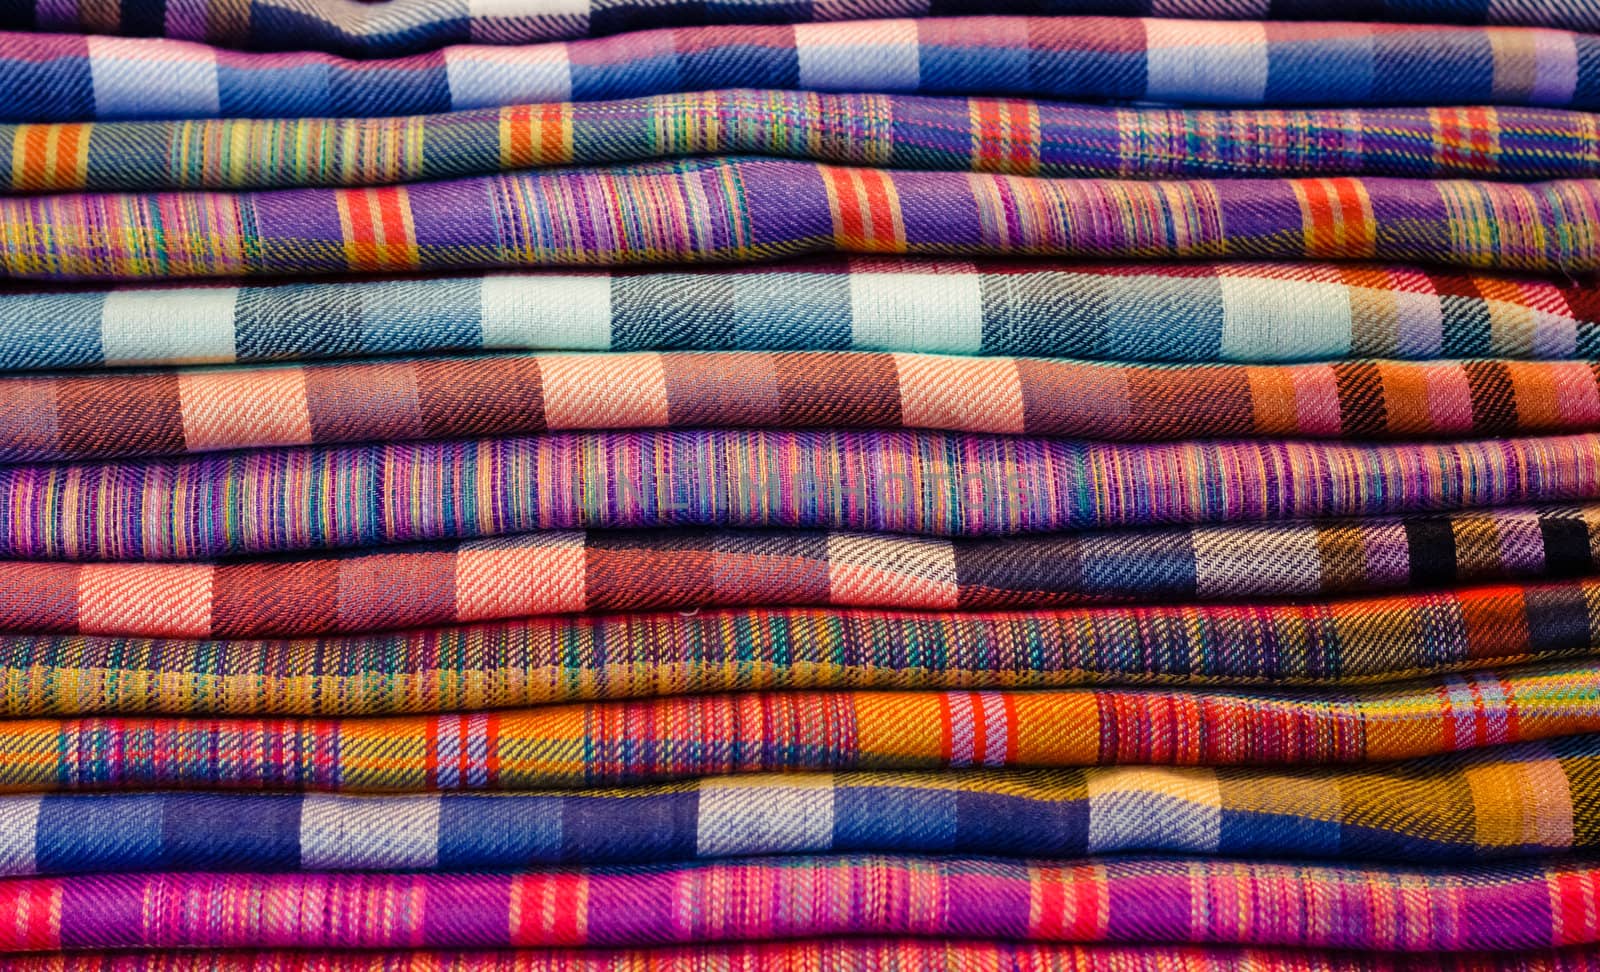 Stack of colorful fabrics at market  by ryhor